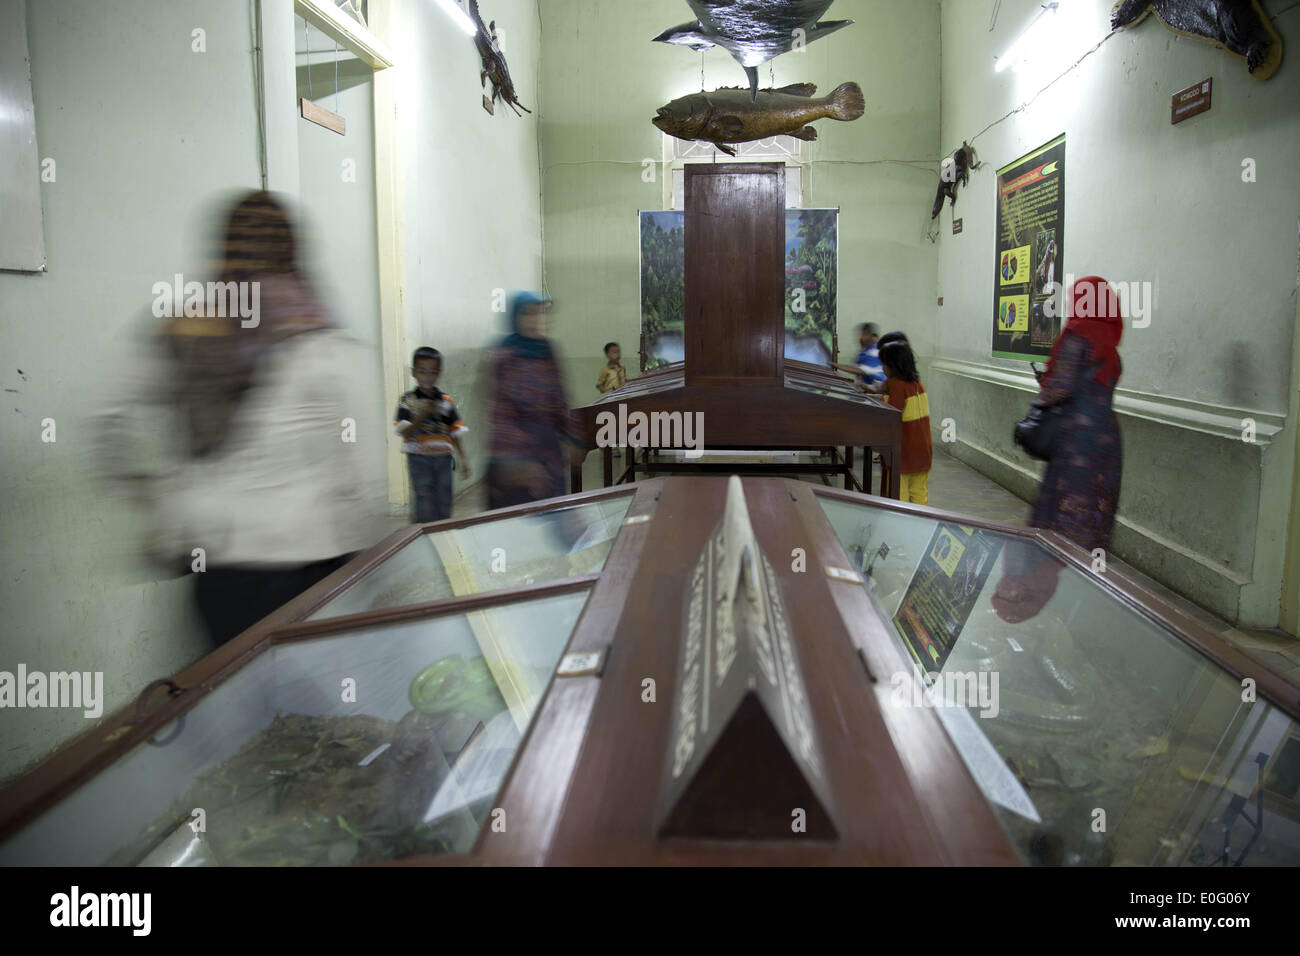 May 12, 2014 - Bogor, West Java, Indonesia - children with their mother enjoying the display, as part of knowledge information about zoology. Zoology Museum located in Bogor, West Java, Indonesia wast built during the colonial era in 1894 by the name ''Zoologicum Bogoriens by Dr. J. C. Koningsberger as Zoology Lab that doing research related to zoology.Nowadays the museum under Indonesia Research Organization have mission to provide Indonesian Fauna Information to young generation as part of science education and also to become international known zoology information in Indonesia. The museum n Stock Photo